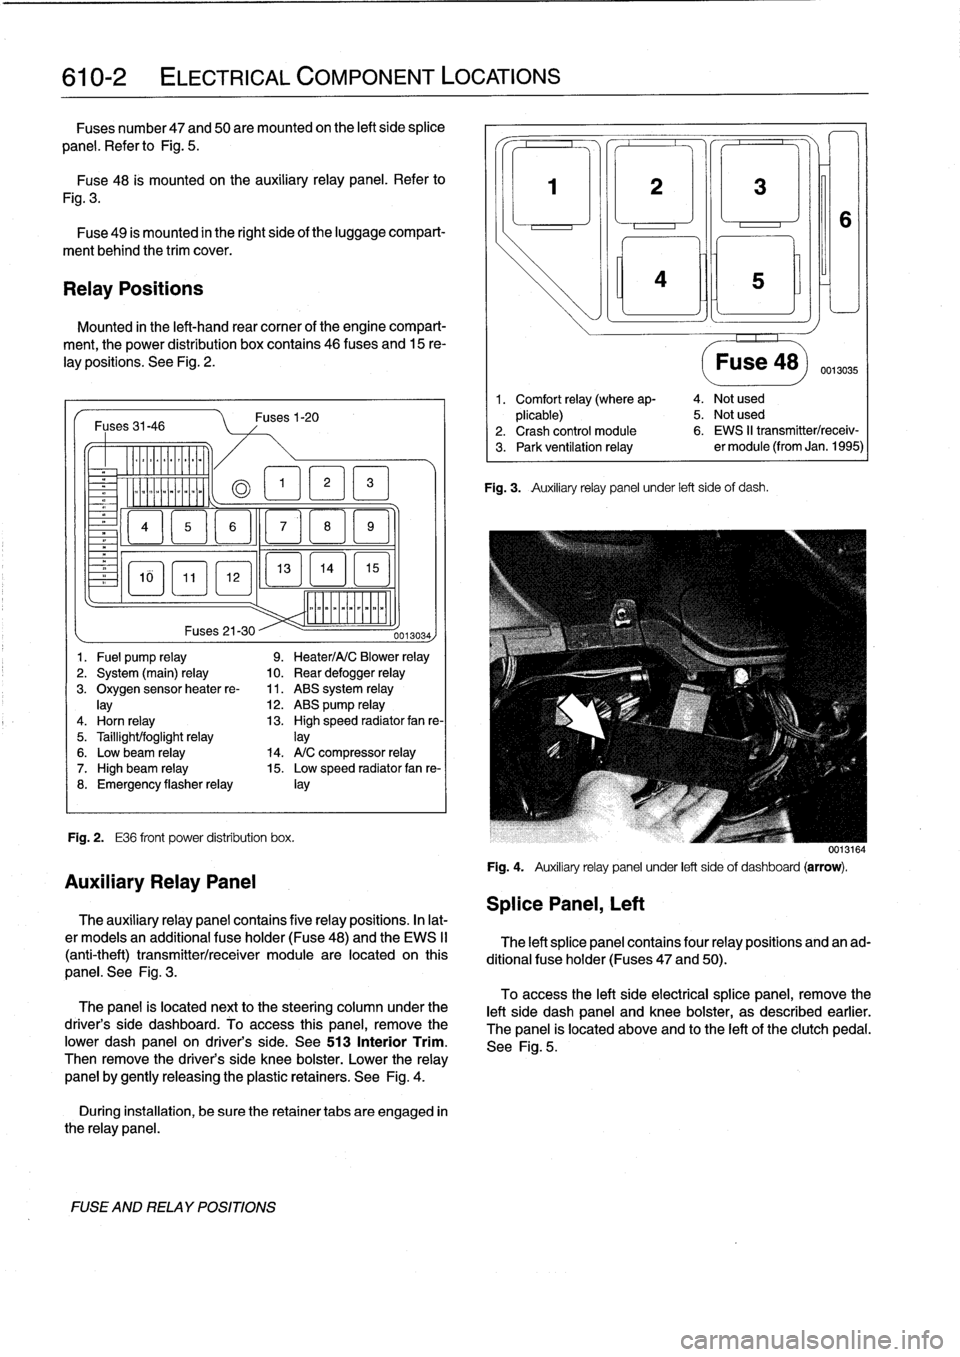 BMW M3 1993 E36 Workshop Manual 
610-2

	

ELECTRICAL
COMPONENT
LOCATIONS

Fuses
number47
and
50are
mounted
on
the
left
side
splice

panel
.
Refer
lo
Fig
.
5
.

Fuse48
is
mounted
on
the
auxiliary
relay
panel
.
Refer
to

Fig
.
3
.

F